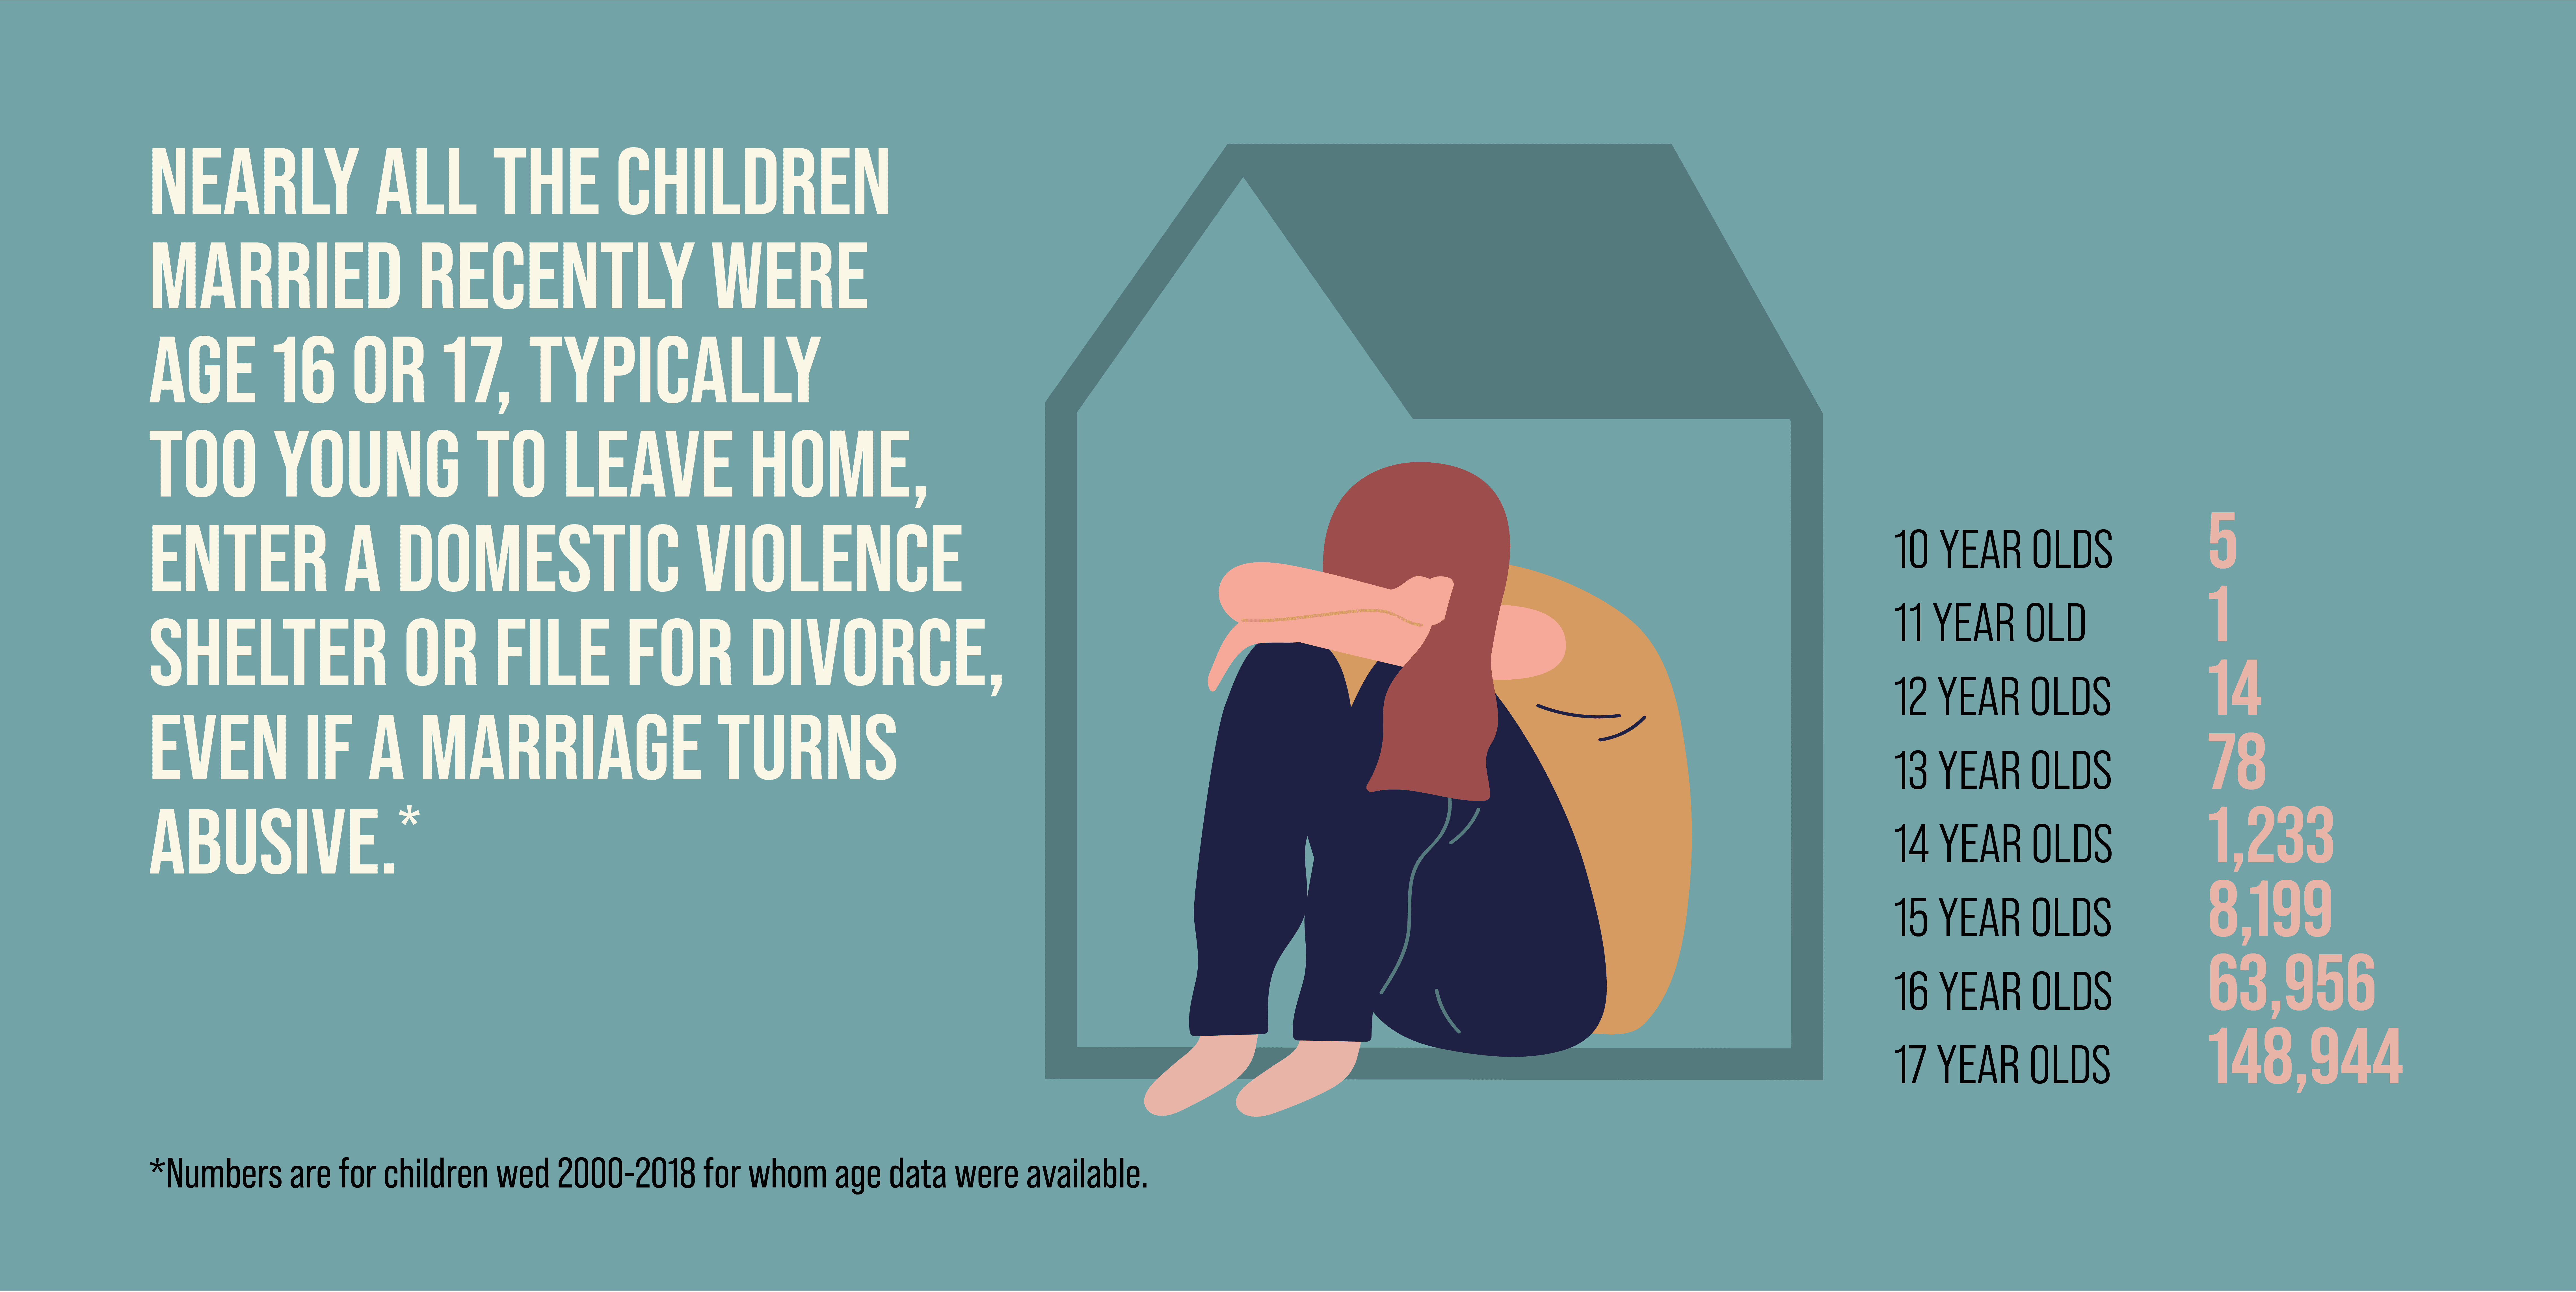 Graphic: Nearly all the children married recently were age 16 or 17, typically too young to leave home, enter a domestic violence shelter or file for divorce, even if a marriage turns abusive. 10 year olds: 5, 11 year old: 1, 12 year olds: 14, 13 year olds: 78, 14 year olds: 1,233, 15 year olds: 8,199, 16 year olds: 63,956, 17 year olds: 148,944 *Numbers are for children wed 2000-2018 for whom age data were available.